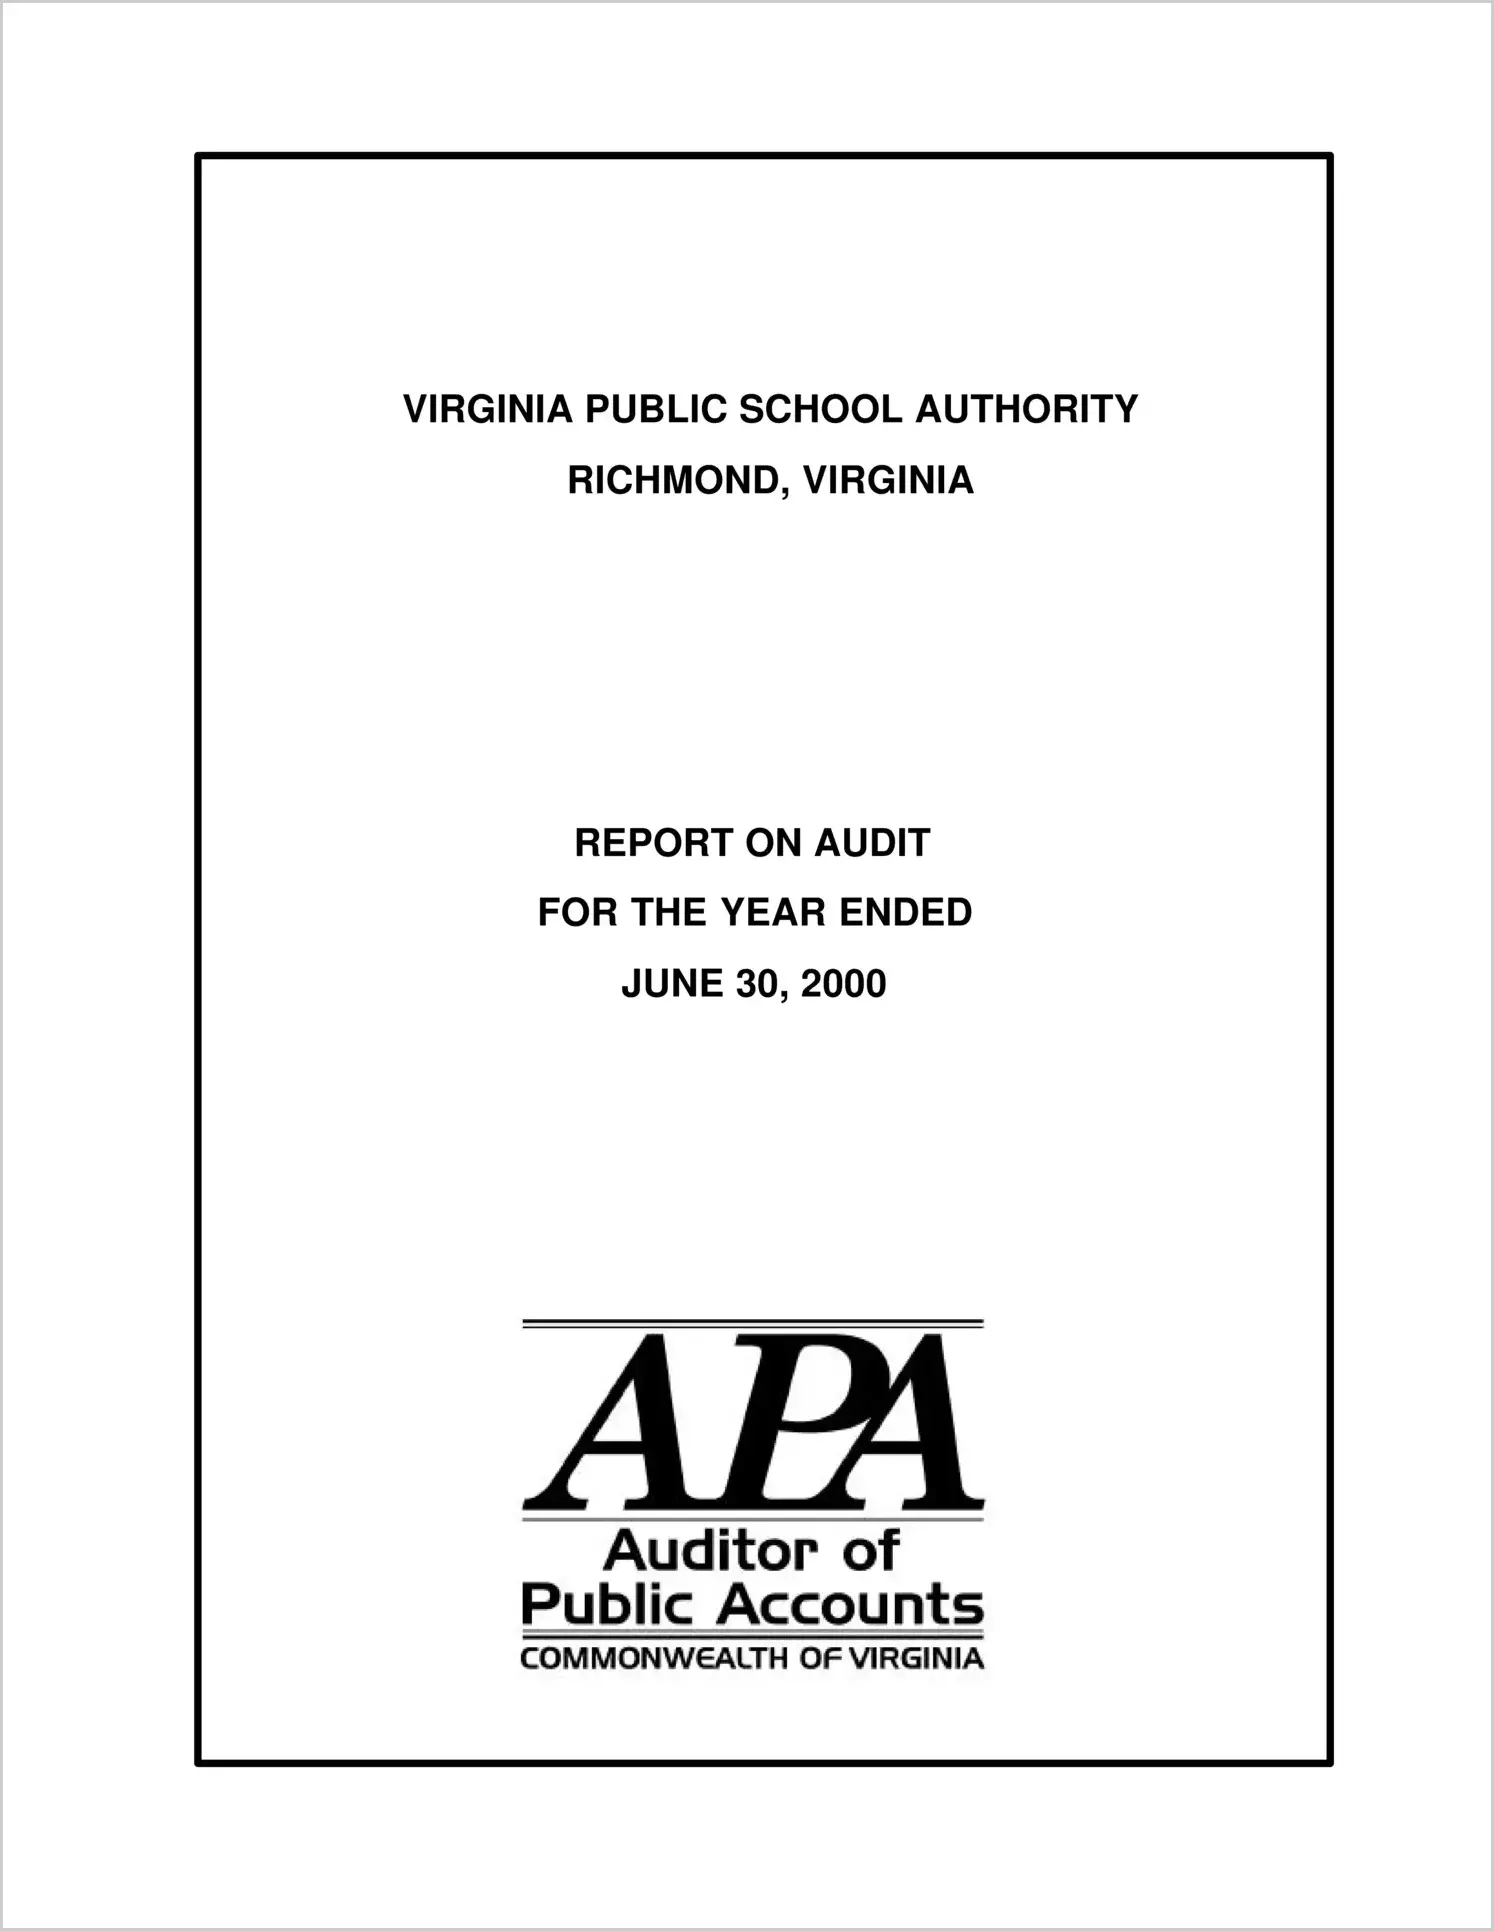 Virginia Public School Authority for the year ended June 30, 2000